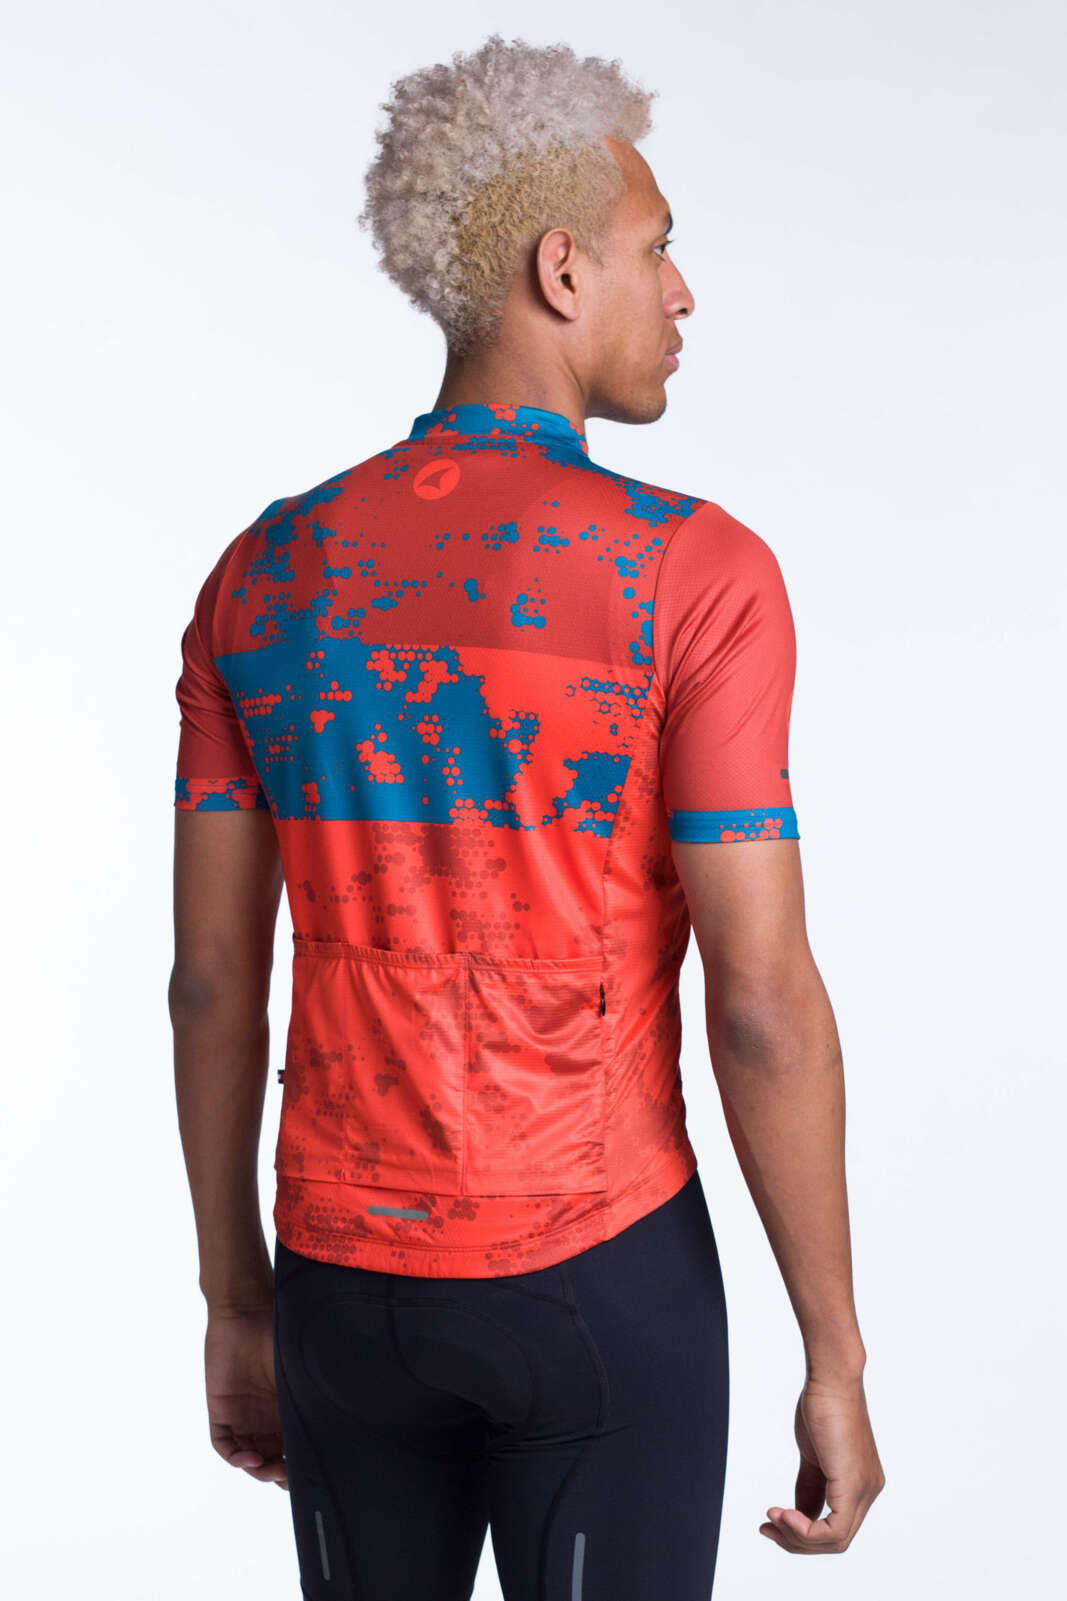 Men's Red Bike Jersey - Ascent Disperse Back View